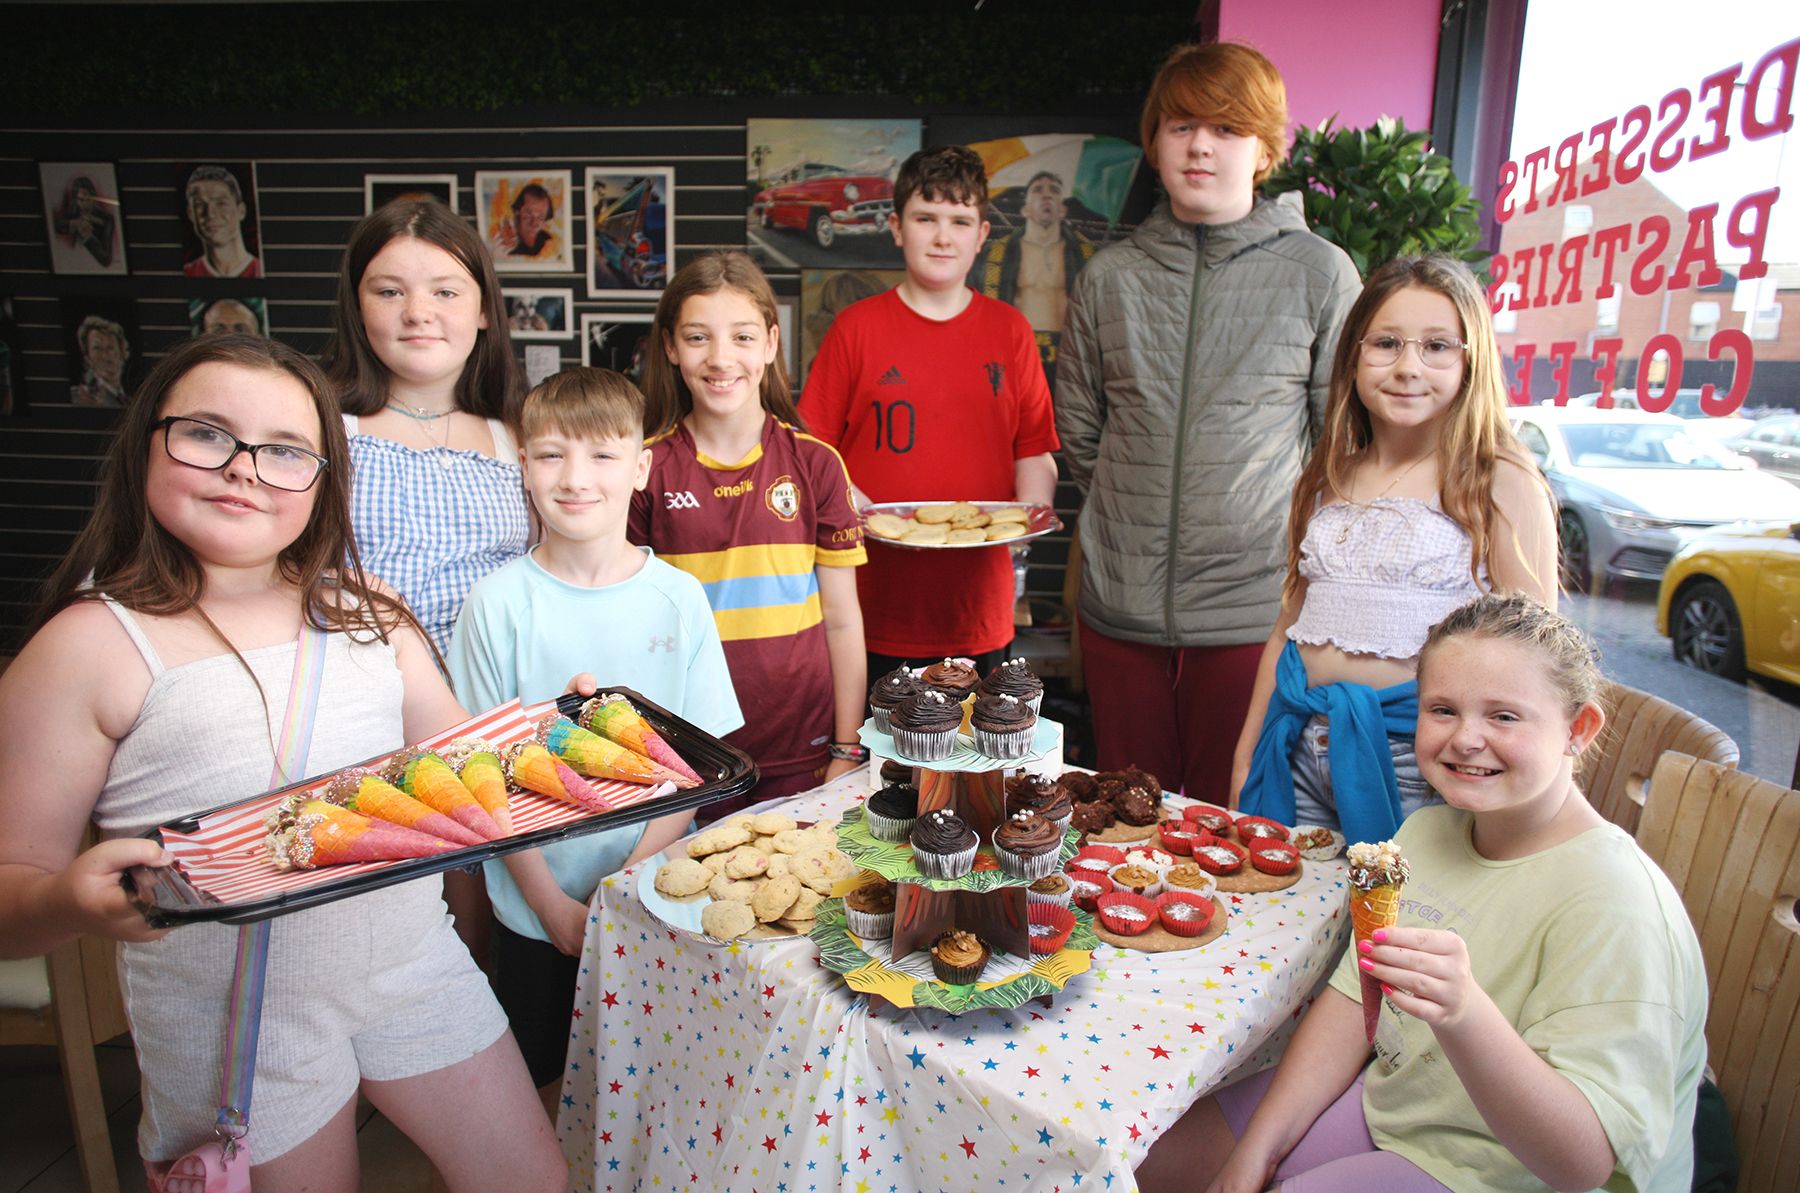 YOUNG ENTREPRENEURS: Stalls taking place every Thursday at Patisserie G bakery.